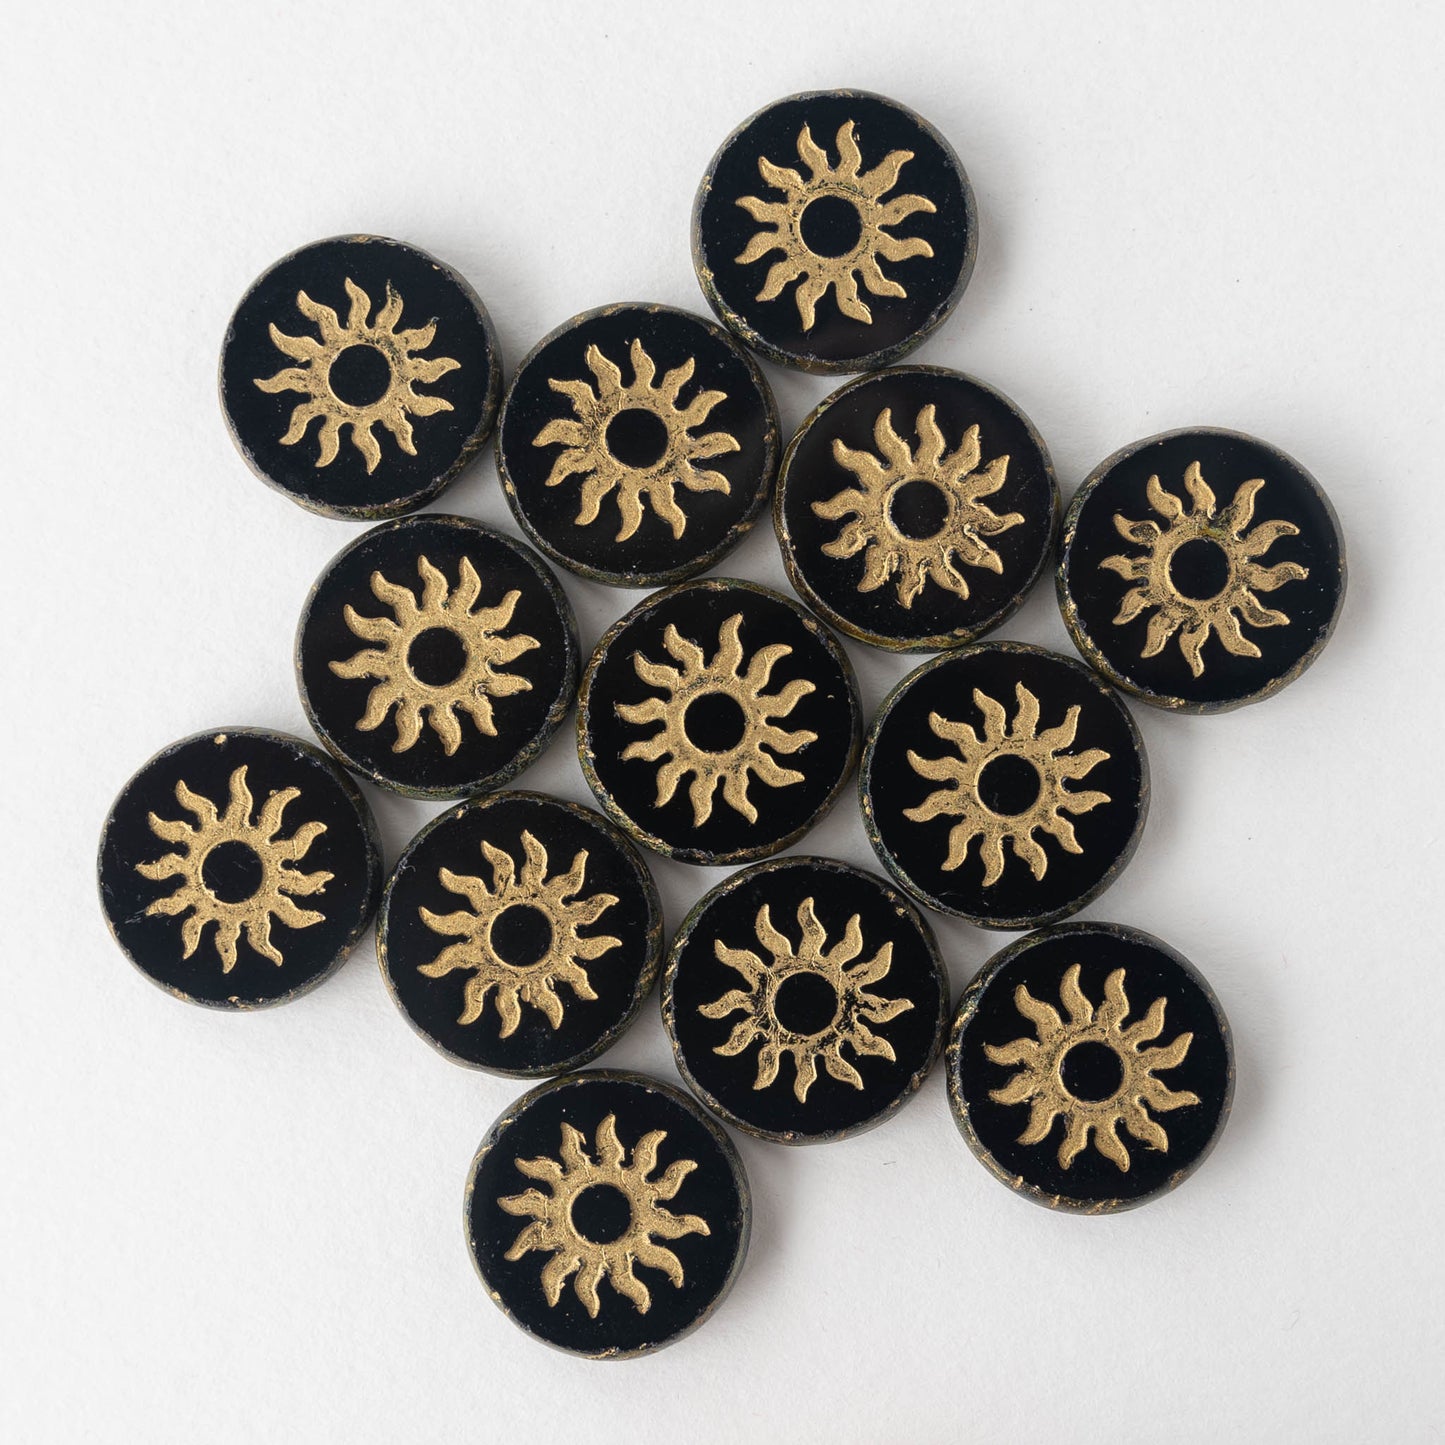 Load image into Gallery viewer, 20mm Sun Coin Beads - Black - 1 bead
